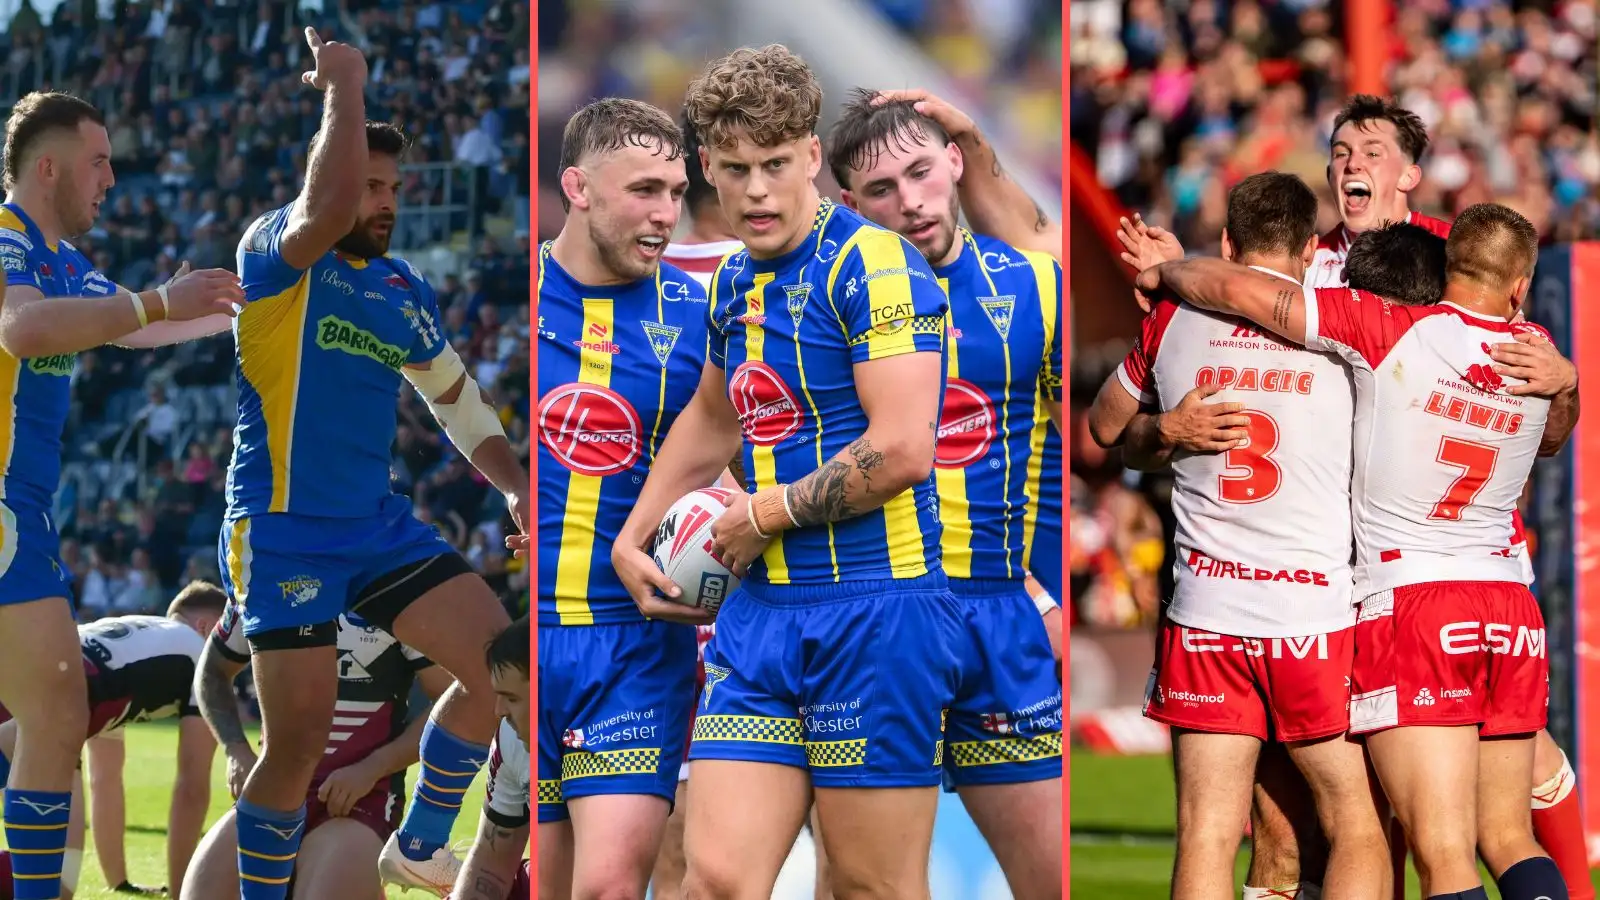 Leeds Rhinos clicking, Warrington’s youth shines through: 8 conclusions from this weekend’s rugby league